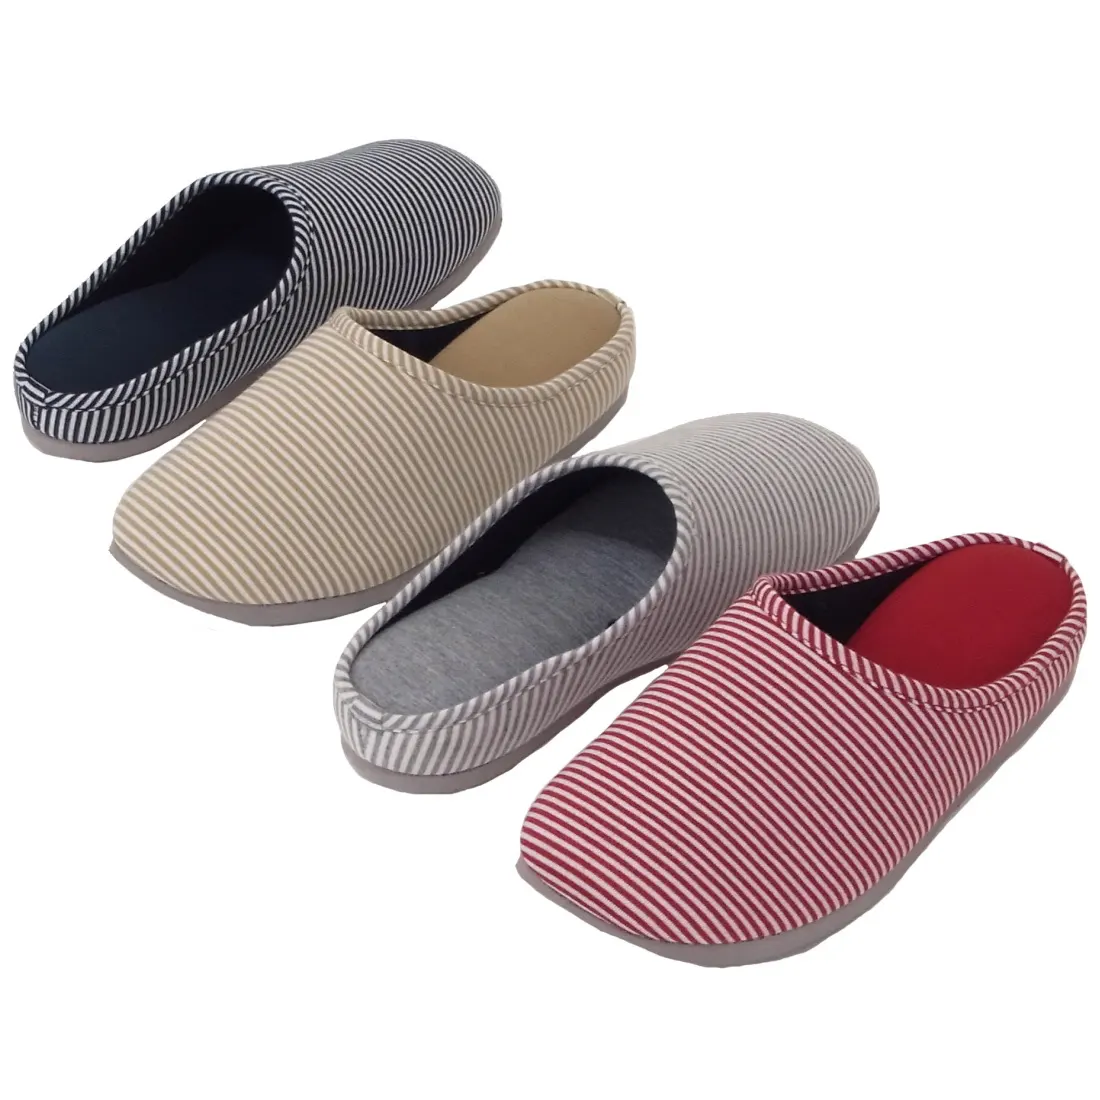 China big size rubber home shoe sandals slipper for wholesale OEM